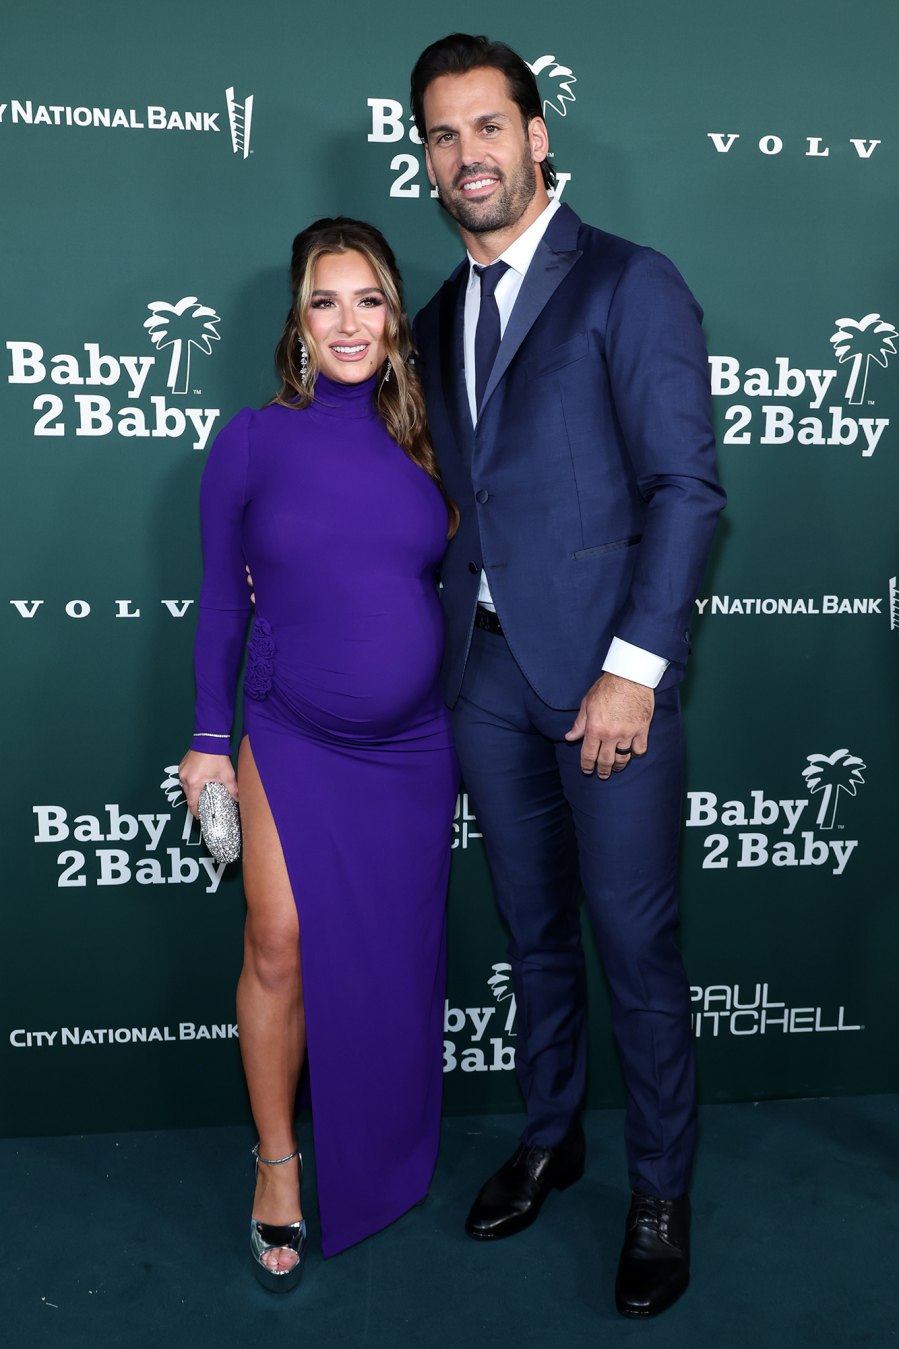 Pregnant Jessie James Decker Cradles Baby Bump at Gala With Husband Eric